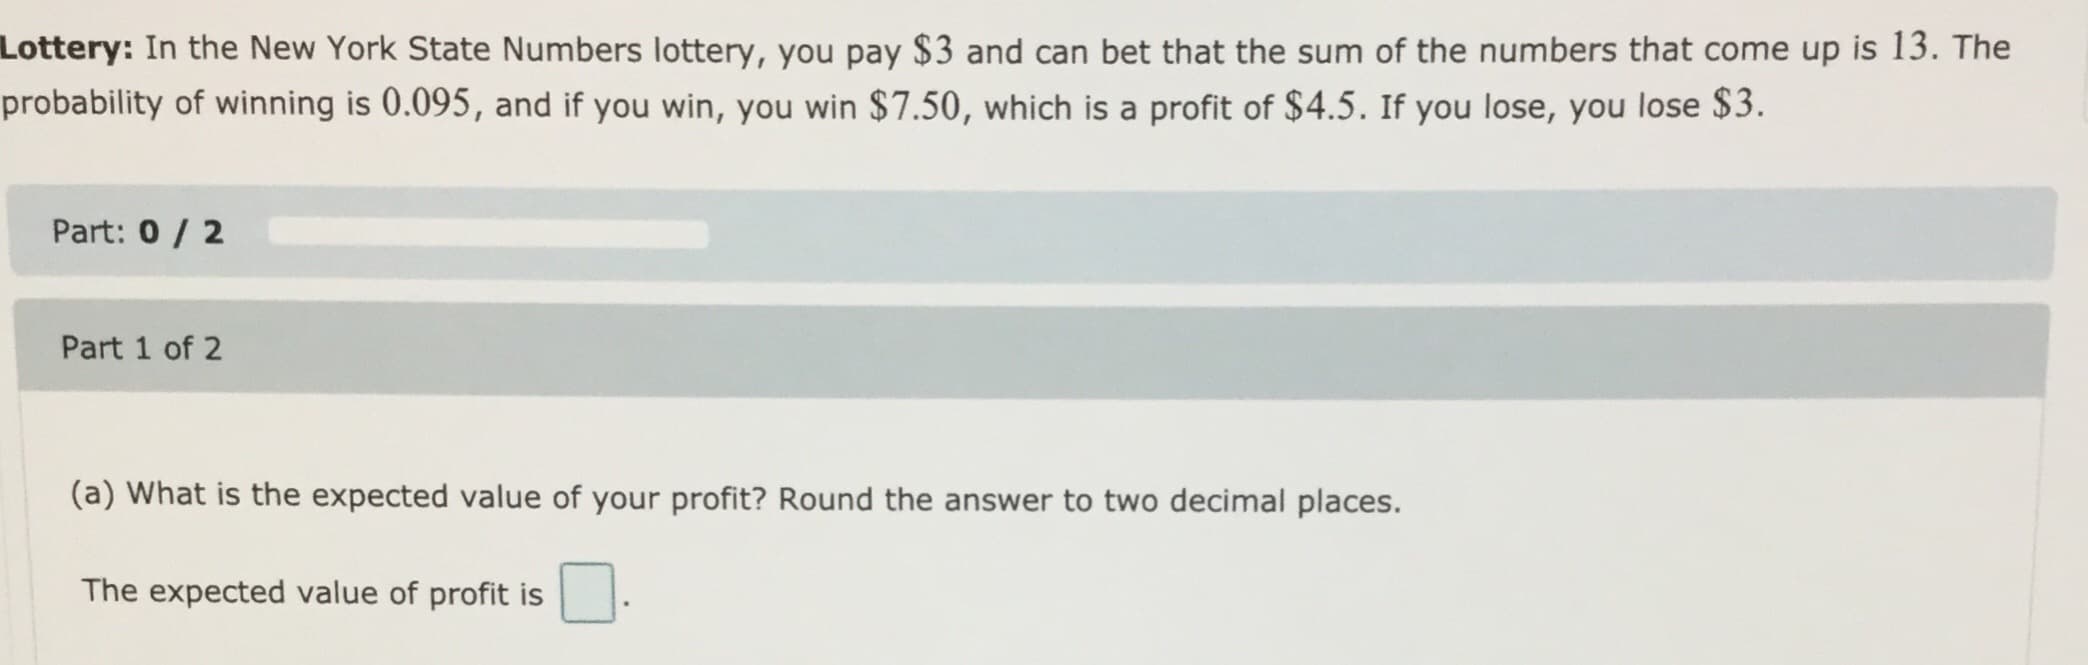 Lottery: In the New York State Numbers lottery, you pay $3 and can bet that the sum of the numbers that come up is 13. The
probability of winning is 0.095, and if you win, you win $7.50, which is a profit of $4.5. If you lose, you lose $3.
Part: 0/ 2
Part 1 of 2
(a) What is the expected value of your profit? Round the answer to two decimal places.
The expected value of profit is
